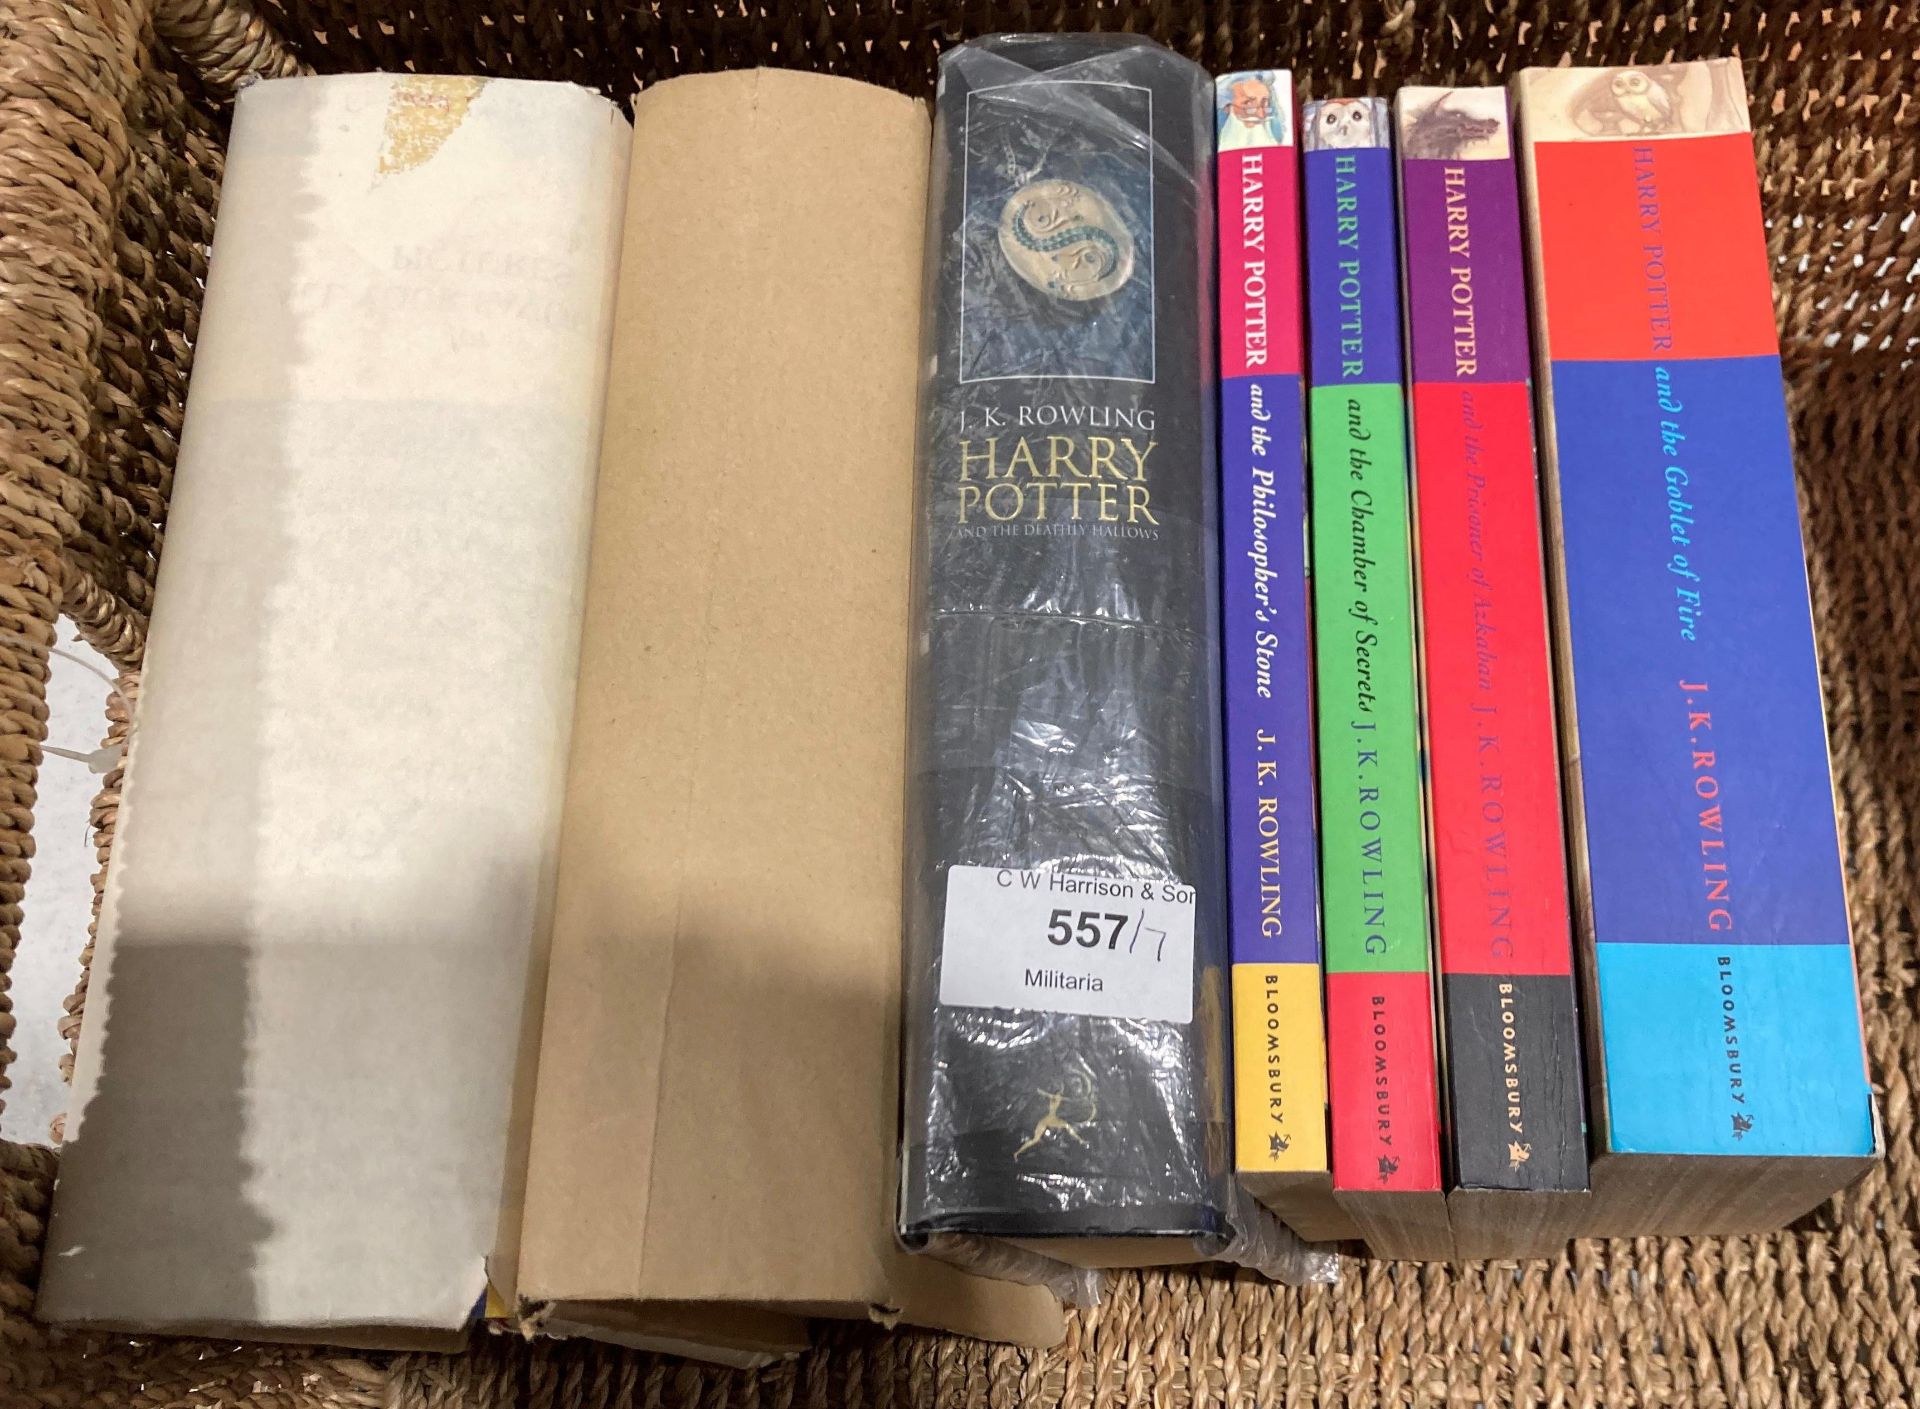 JK Rowling - three Harry Potter hardback books (all in dust jackets) published by Bloomsbury and